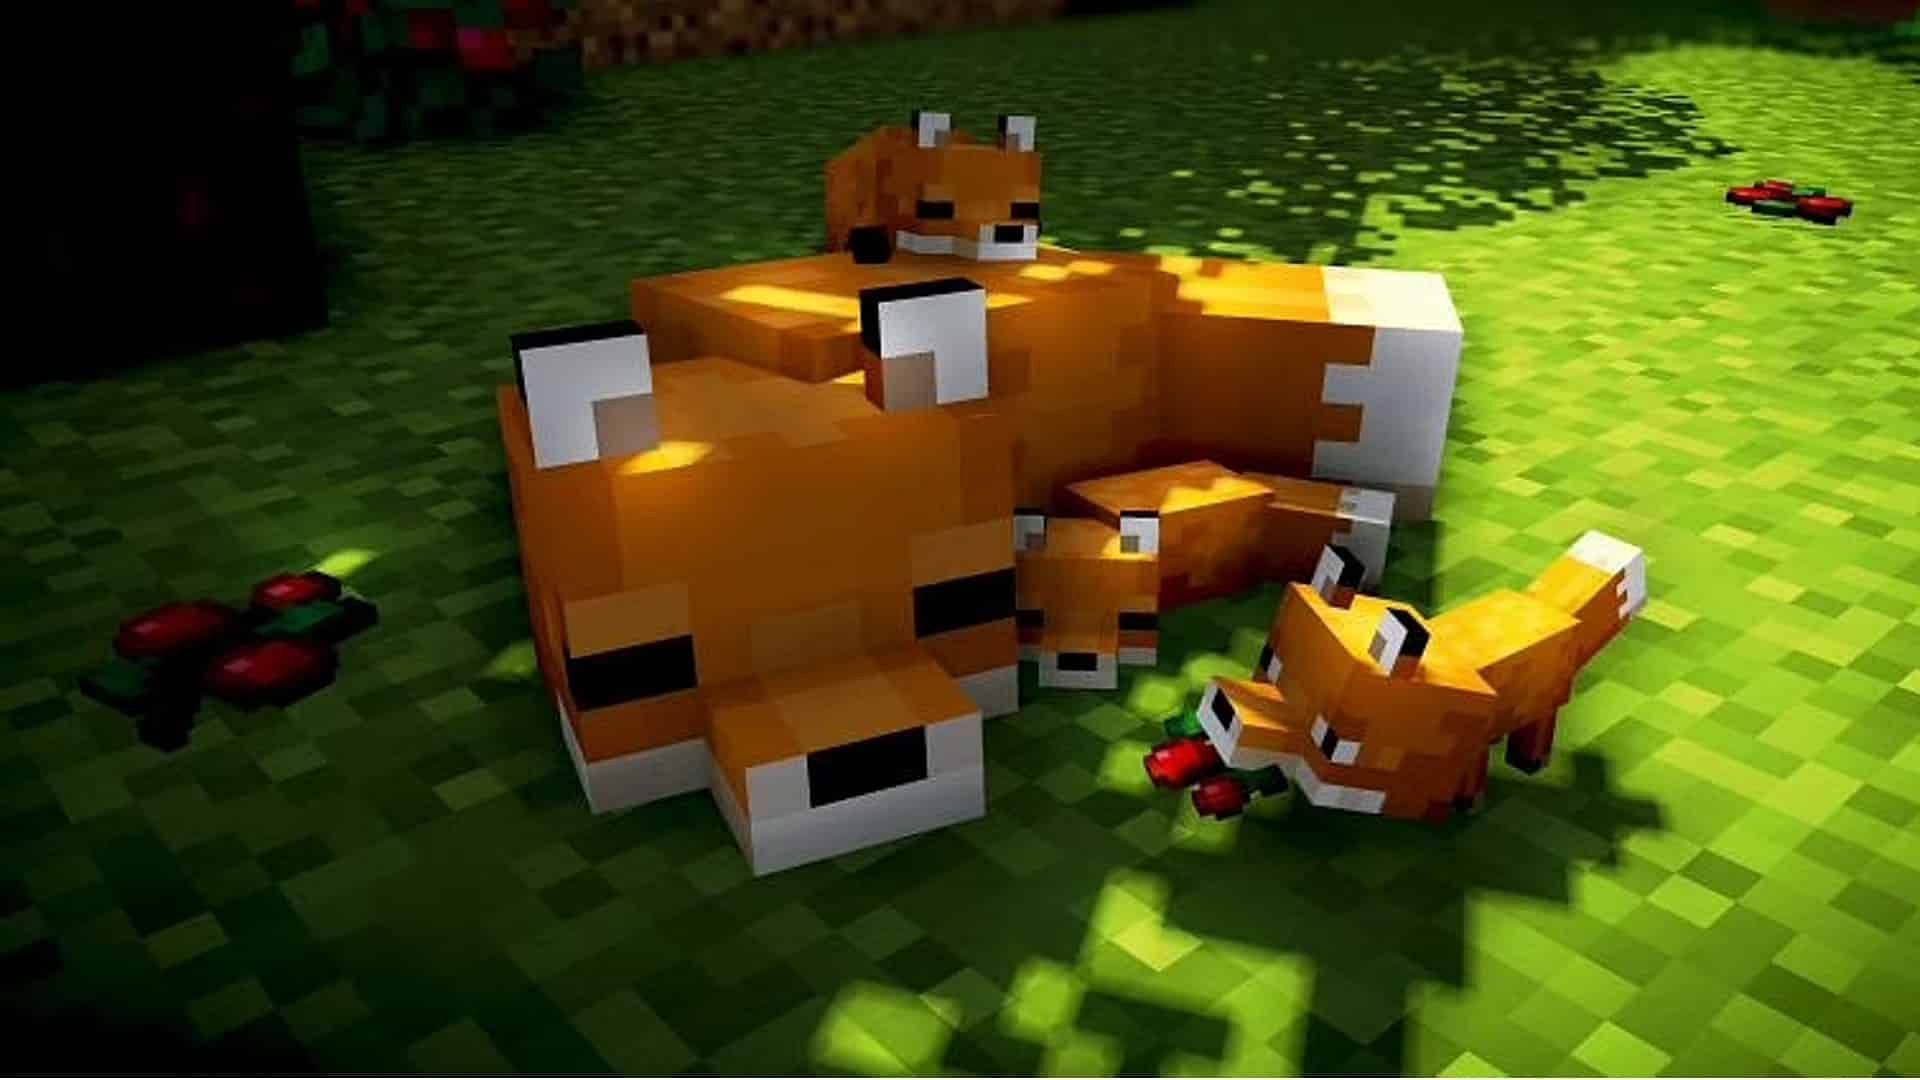 How to Tame a Fox in Minecraft by Breeding Foxes